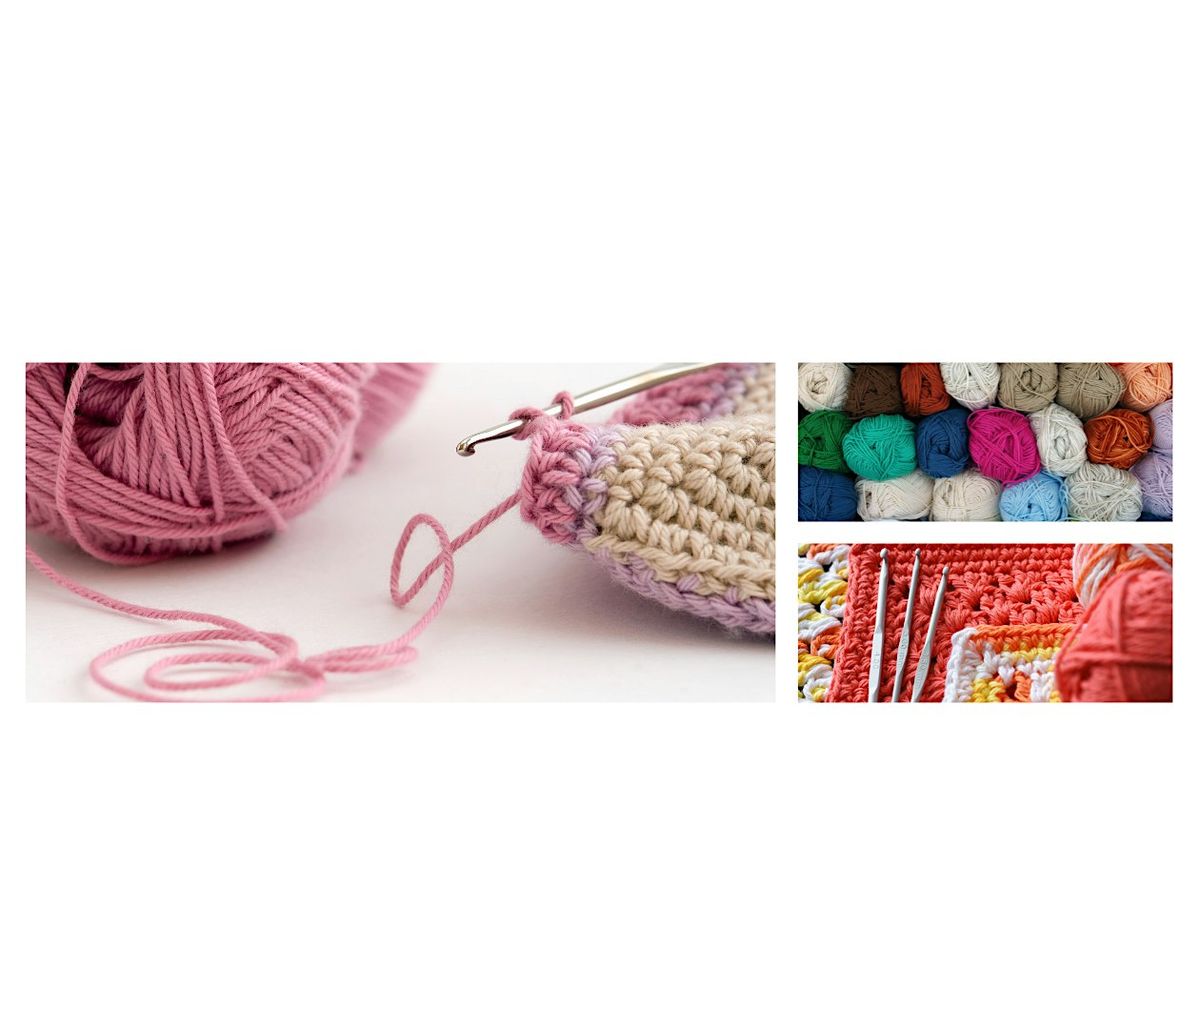 Learn to Crochet with Amy @ The Nook Tewkesbury